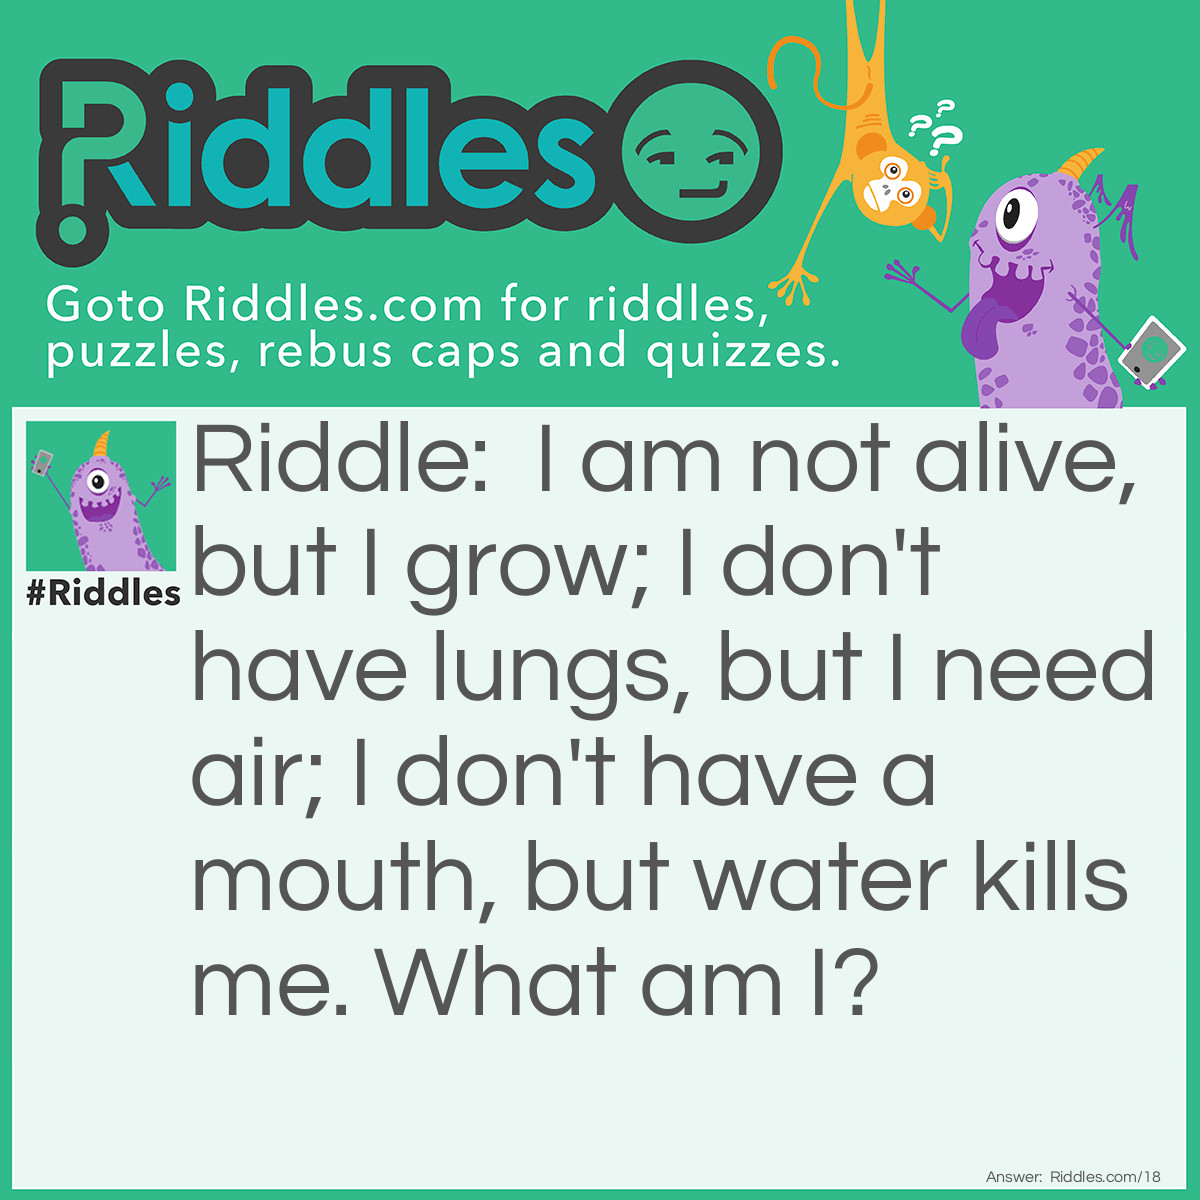 Riddle: I am not alive, but I grow; I don't have lungs, but I need air; I don't have a mouth, but water kills me. <a href="https://www.riddles.com/what-am-i-riddles">What am I</a>? Answer: Fire.